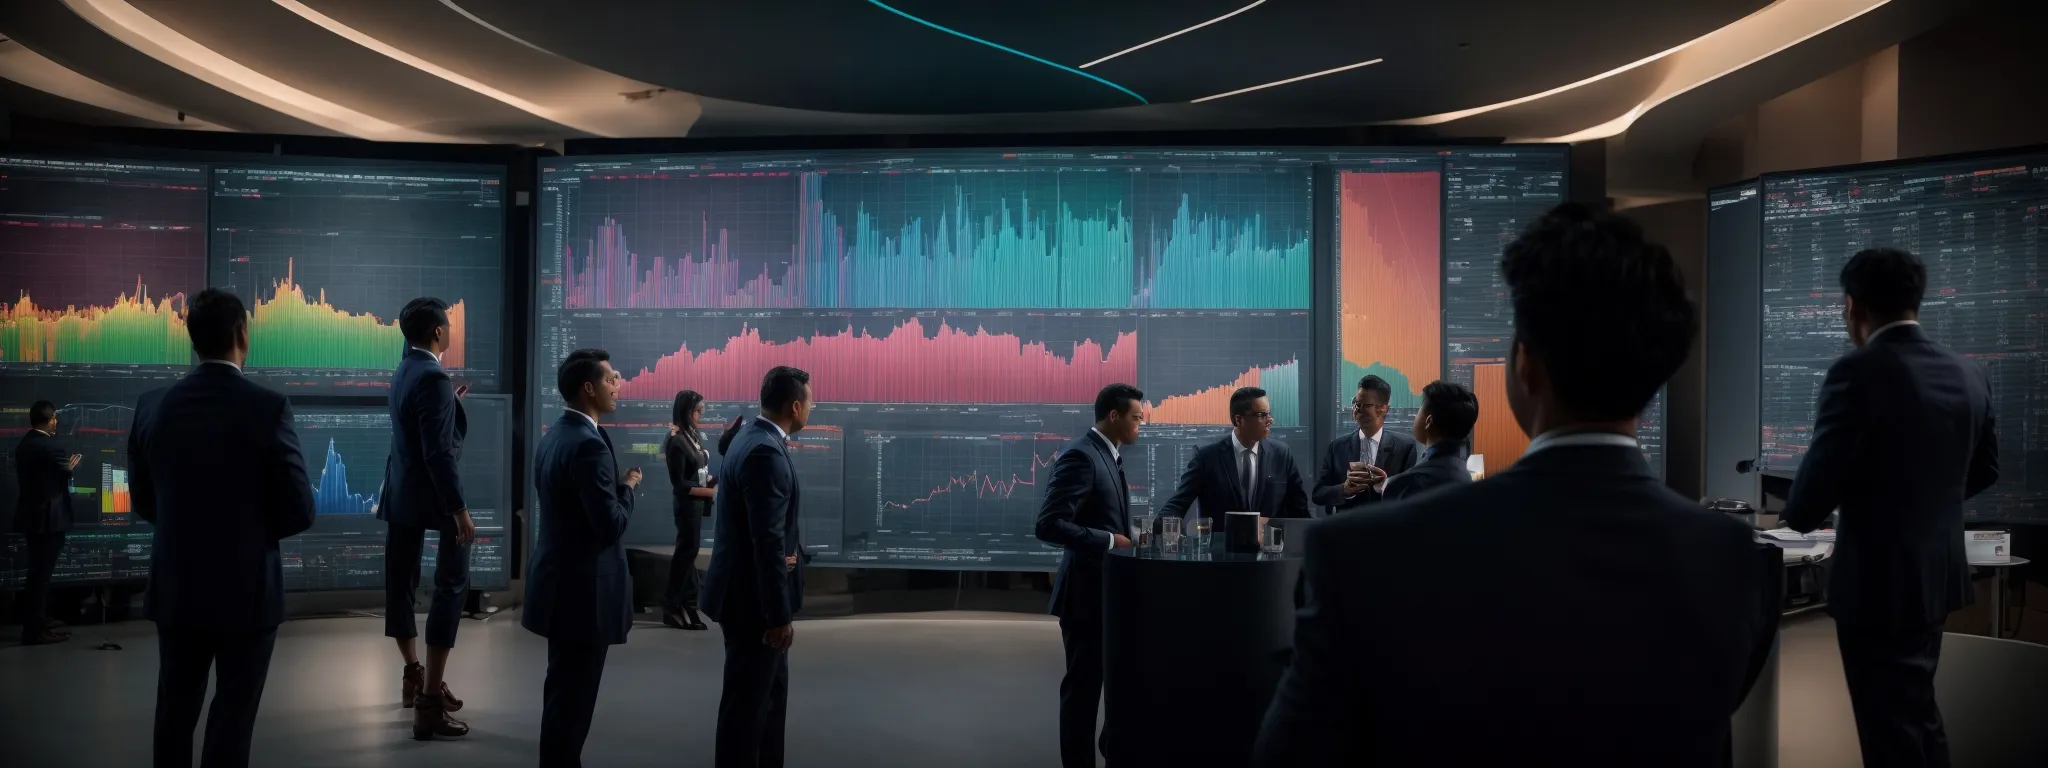 a group of professionals is gathered around a large digital screen analyzing colorful graphs that depict investment strategies.